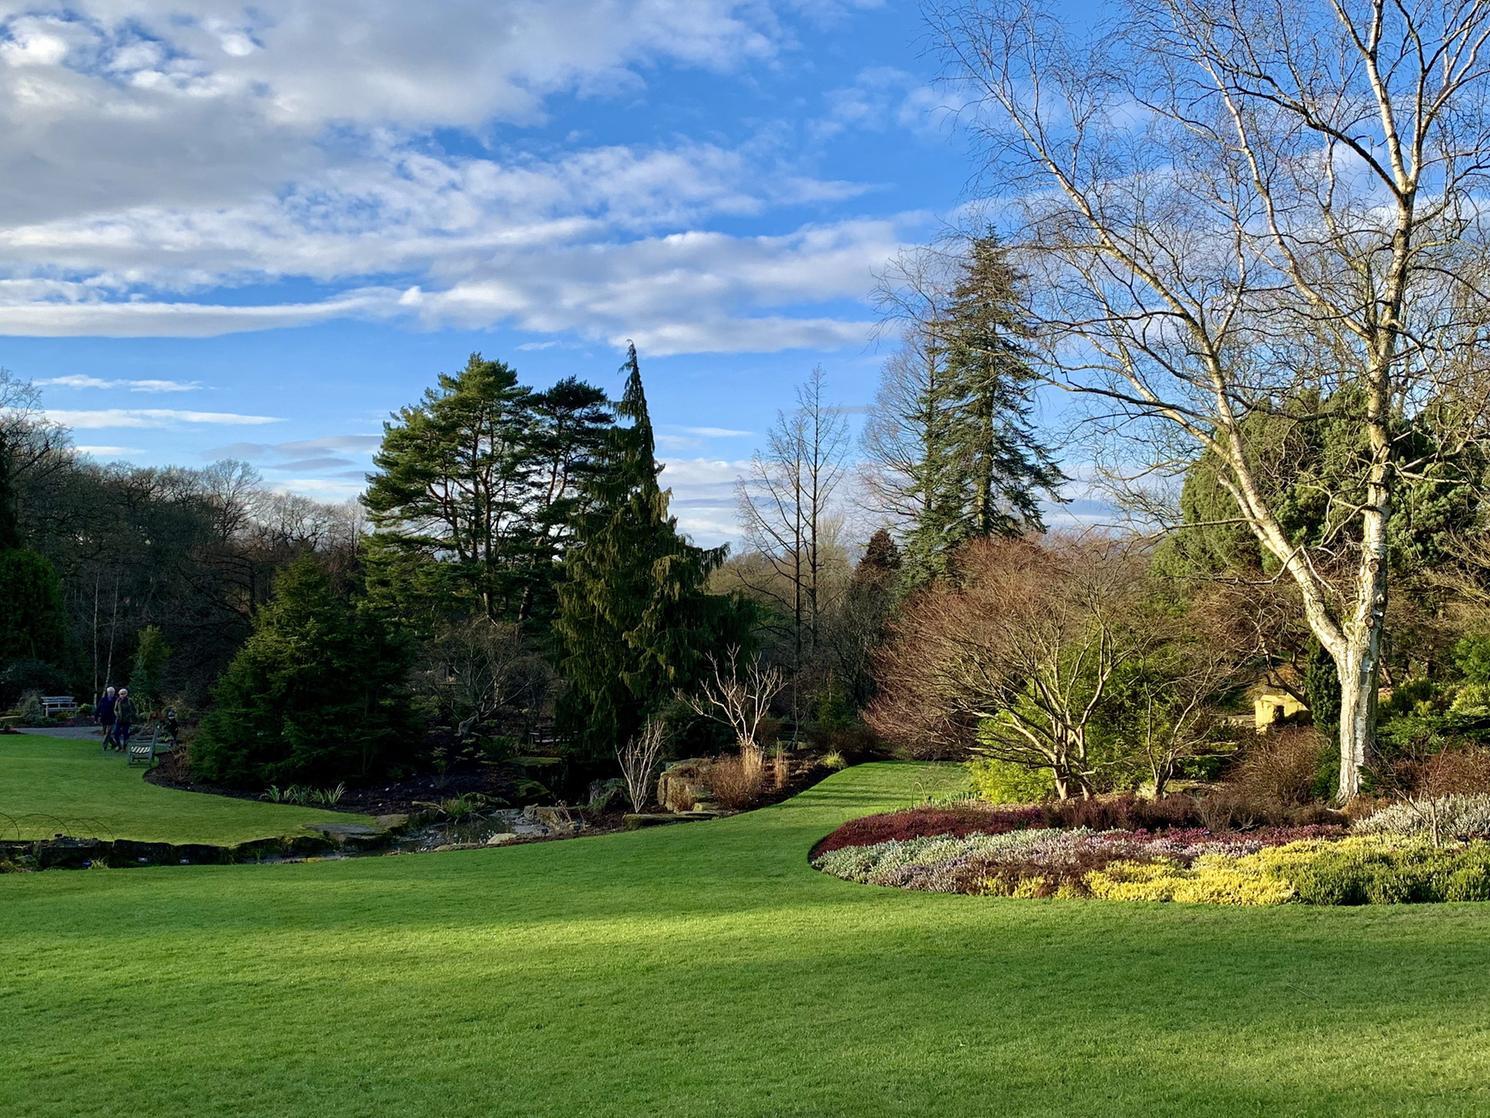 Harrogate offers horticulture galore, and Harlow Carr is no exception. With beautiful gardens and a Bettys cafe, this is a great place to spend time in Harrogate.